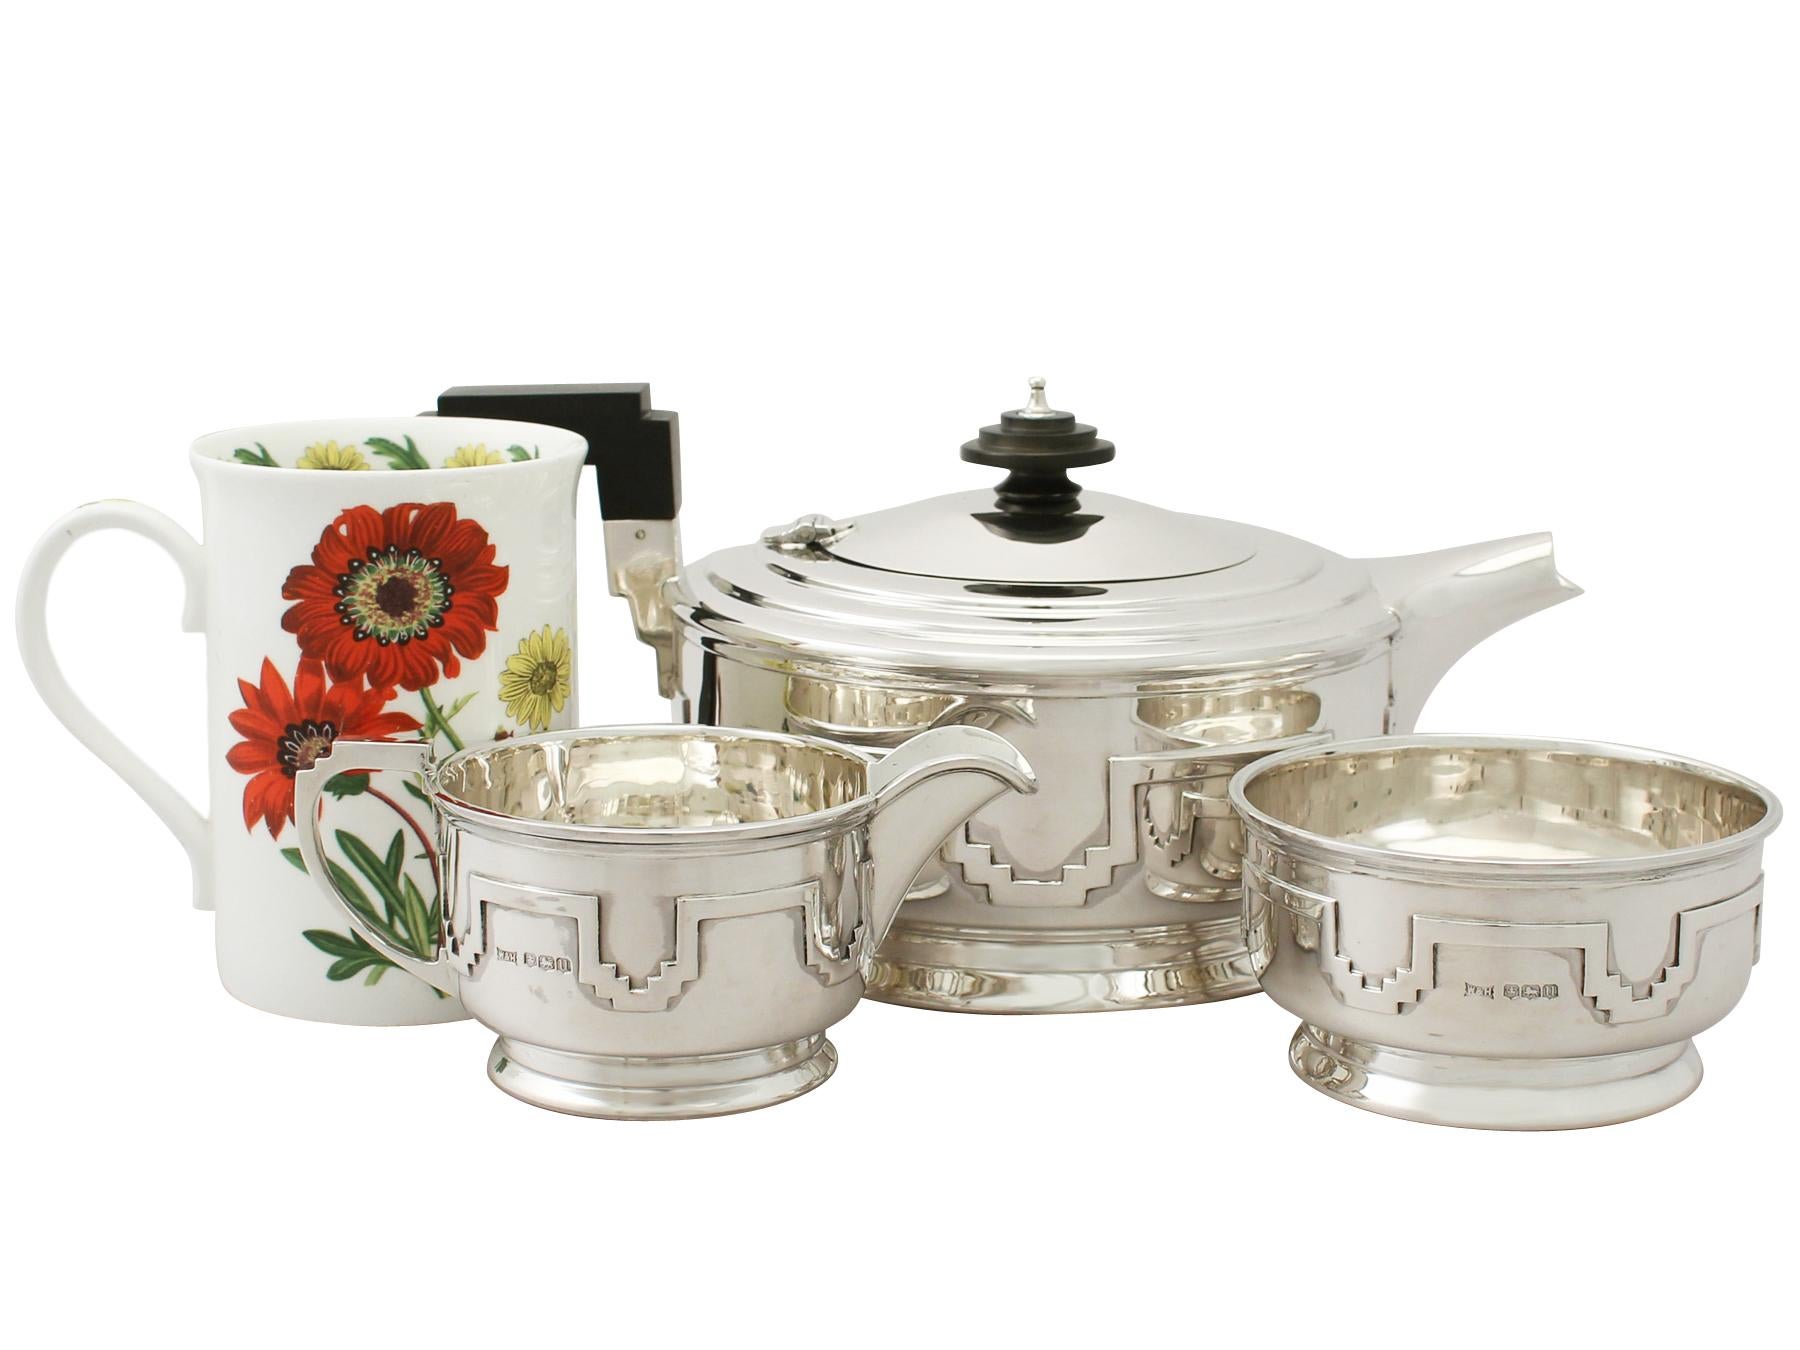 An exceptional, fine and impressive antique George VI English sterling silver three-piece tea service/set made in the Art Deco style; an addition to our silver teaware collection.

This exceptional antique George VI sterling silver three-piece